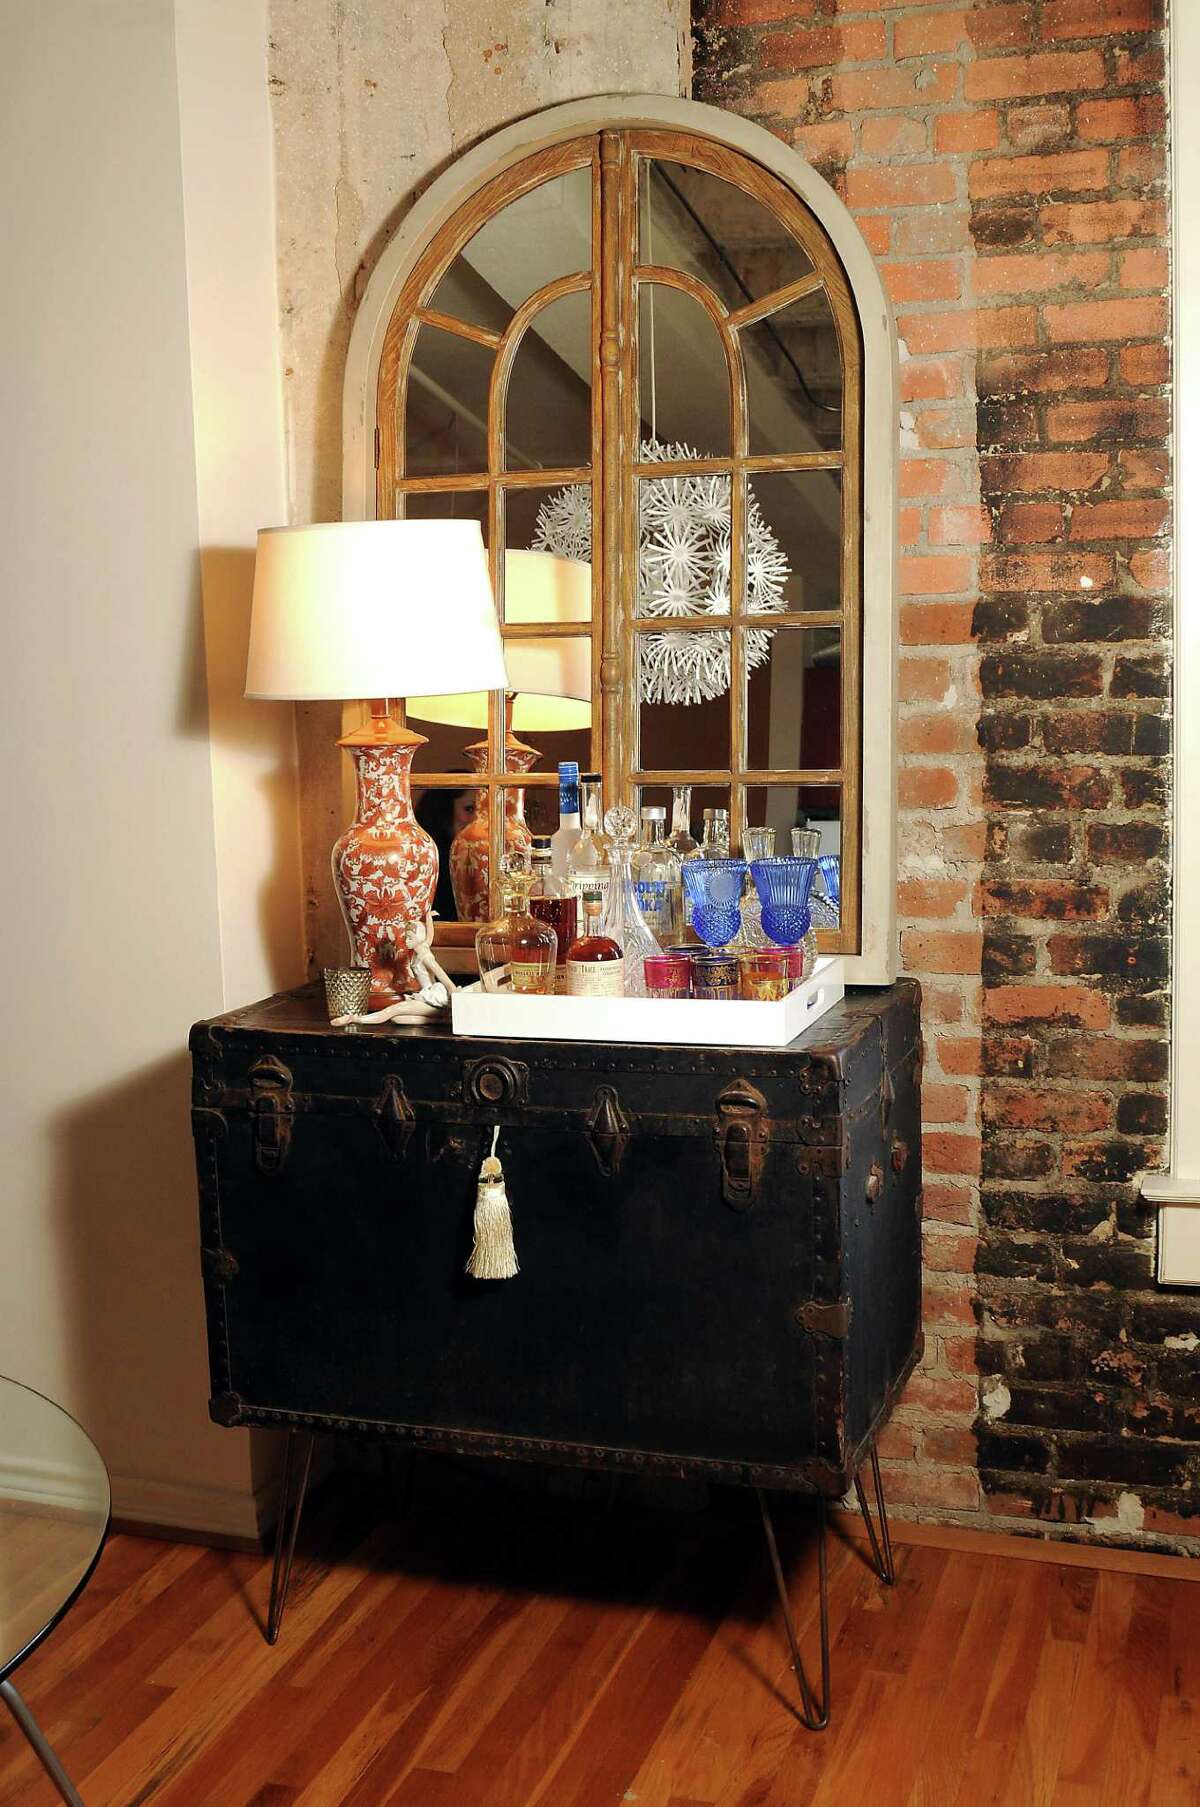 Clockwise from top: Lindsey Brown in her downtown loft. A modern dining table and Ikea chairs offset antiques peppered about the space and the apartment's historic bones. A 100-year-old steamer trunk found on Craigslist serves as a bar. A statue of dancers in the living room, purchased at the Houston Ballet Ball auction, nods to Brown's love of dance.